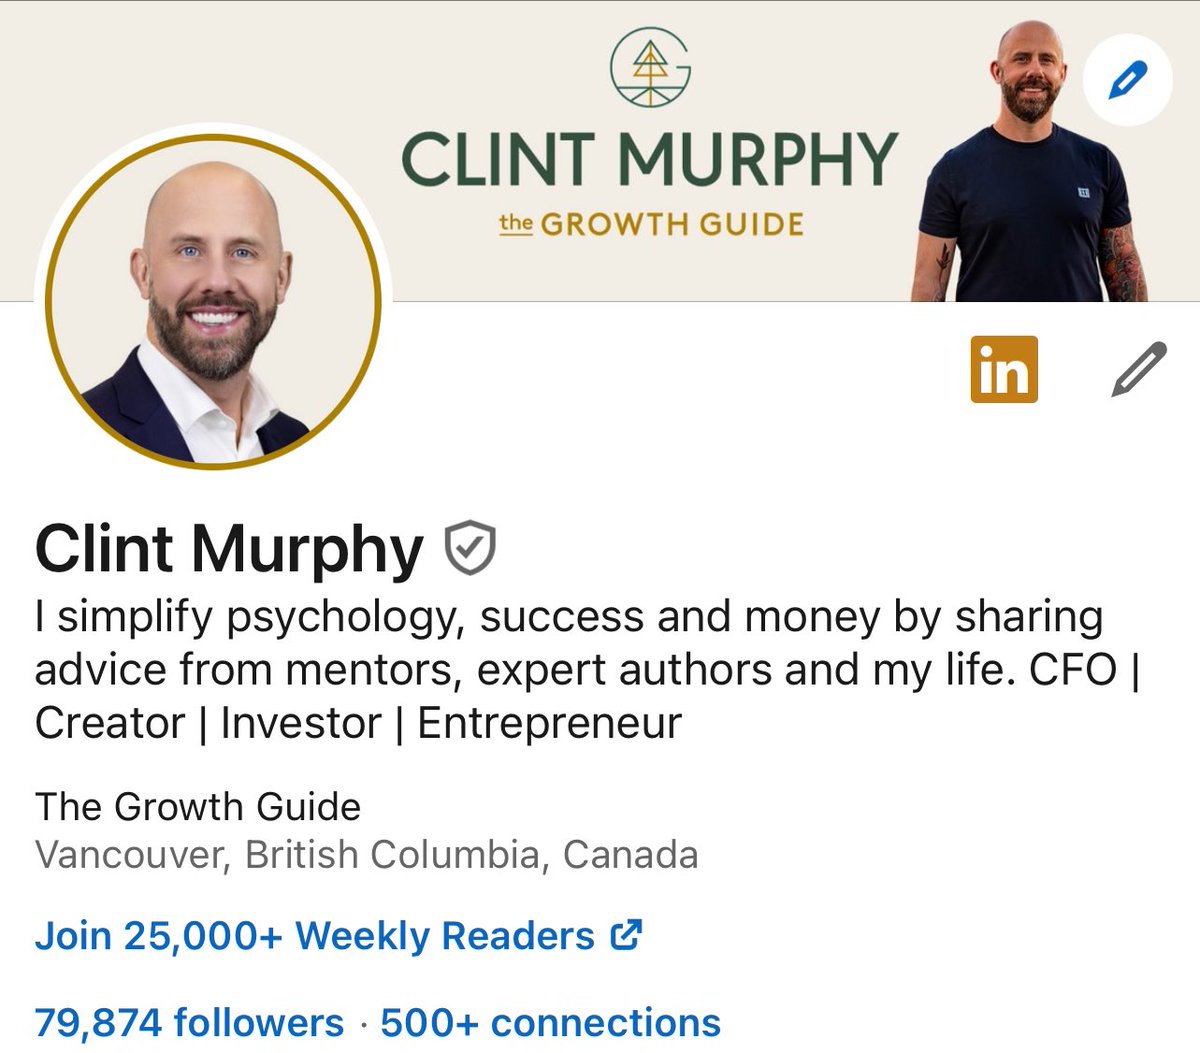 About to cross 80,000 on LinkedIn, which had generated amazing leads, benefits and opportunities. Too many people from Twitter are sleeping on it. My wife has grown it by sharing my Twitter content, 🤯 For beginners, it may even be easier to grow over there... 🤫